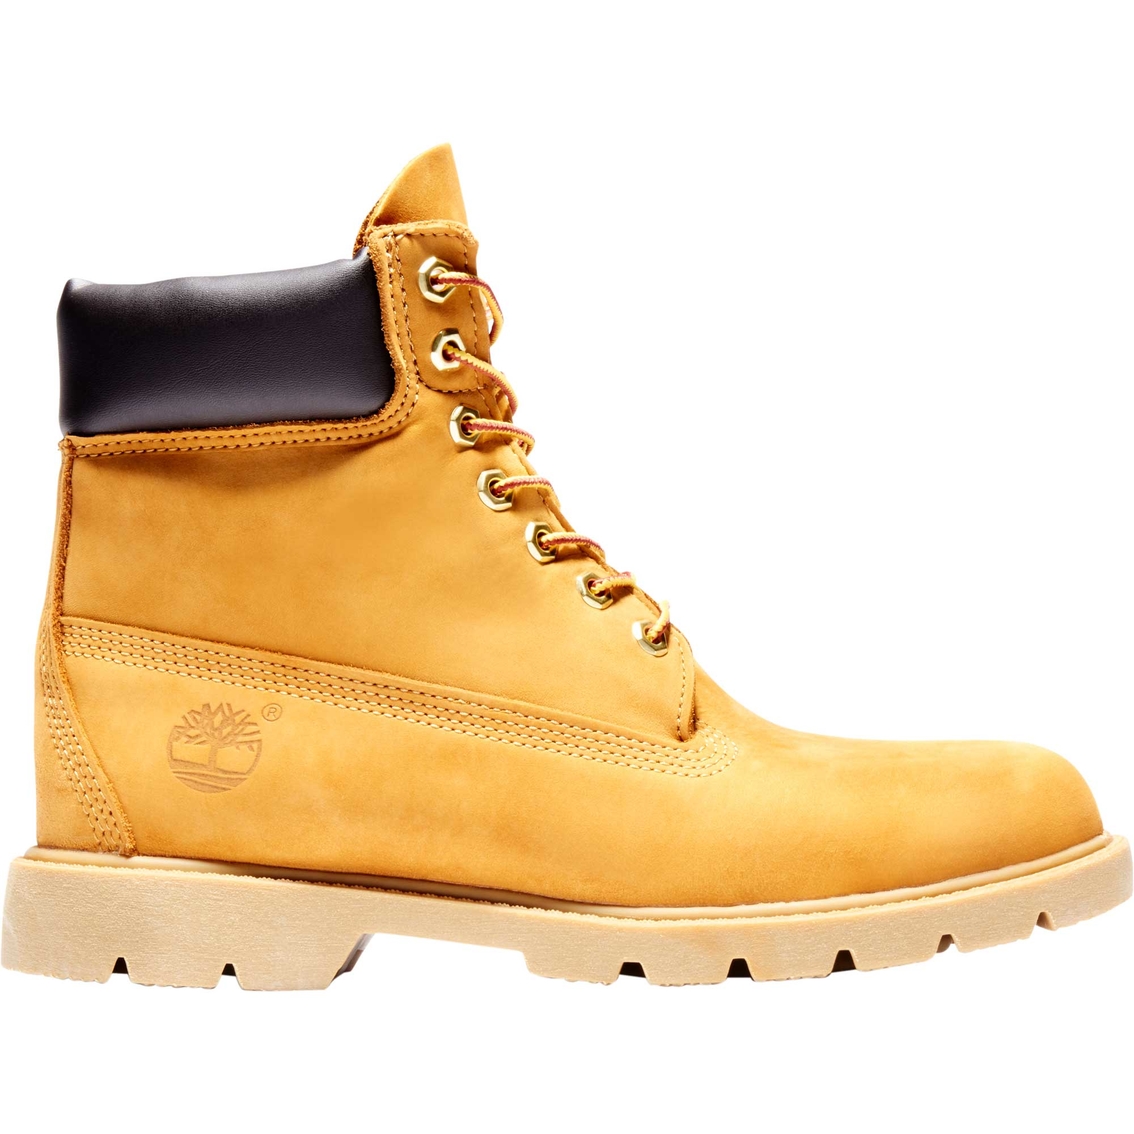 Timberland Classic 6 in. Boots - Image 3 of 7